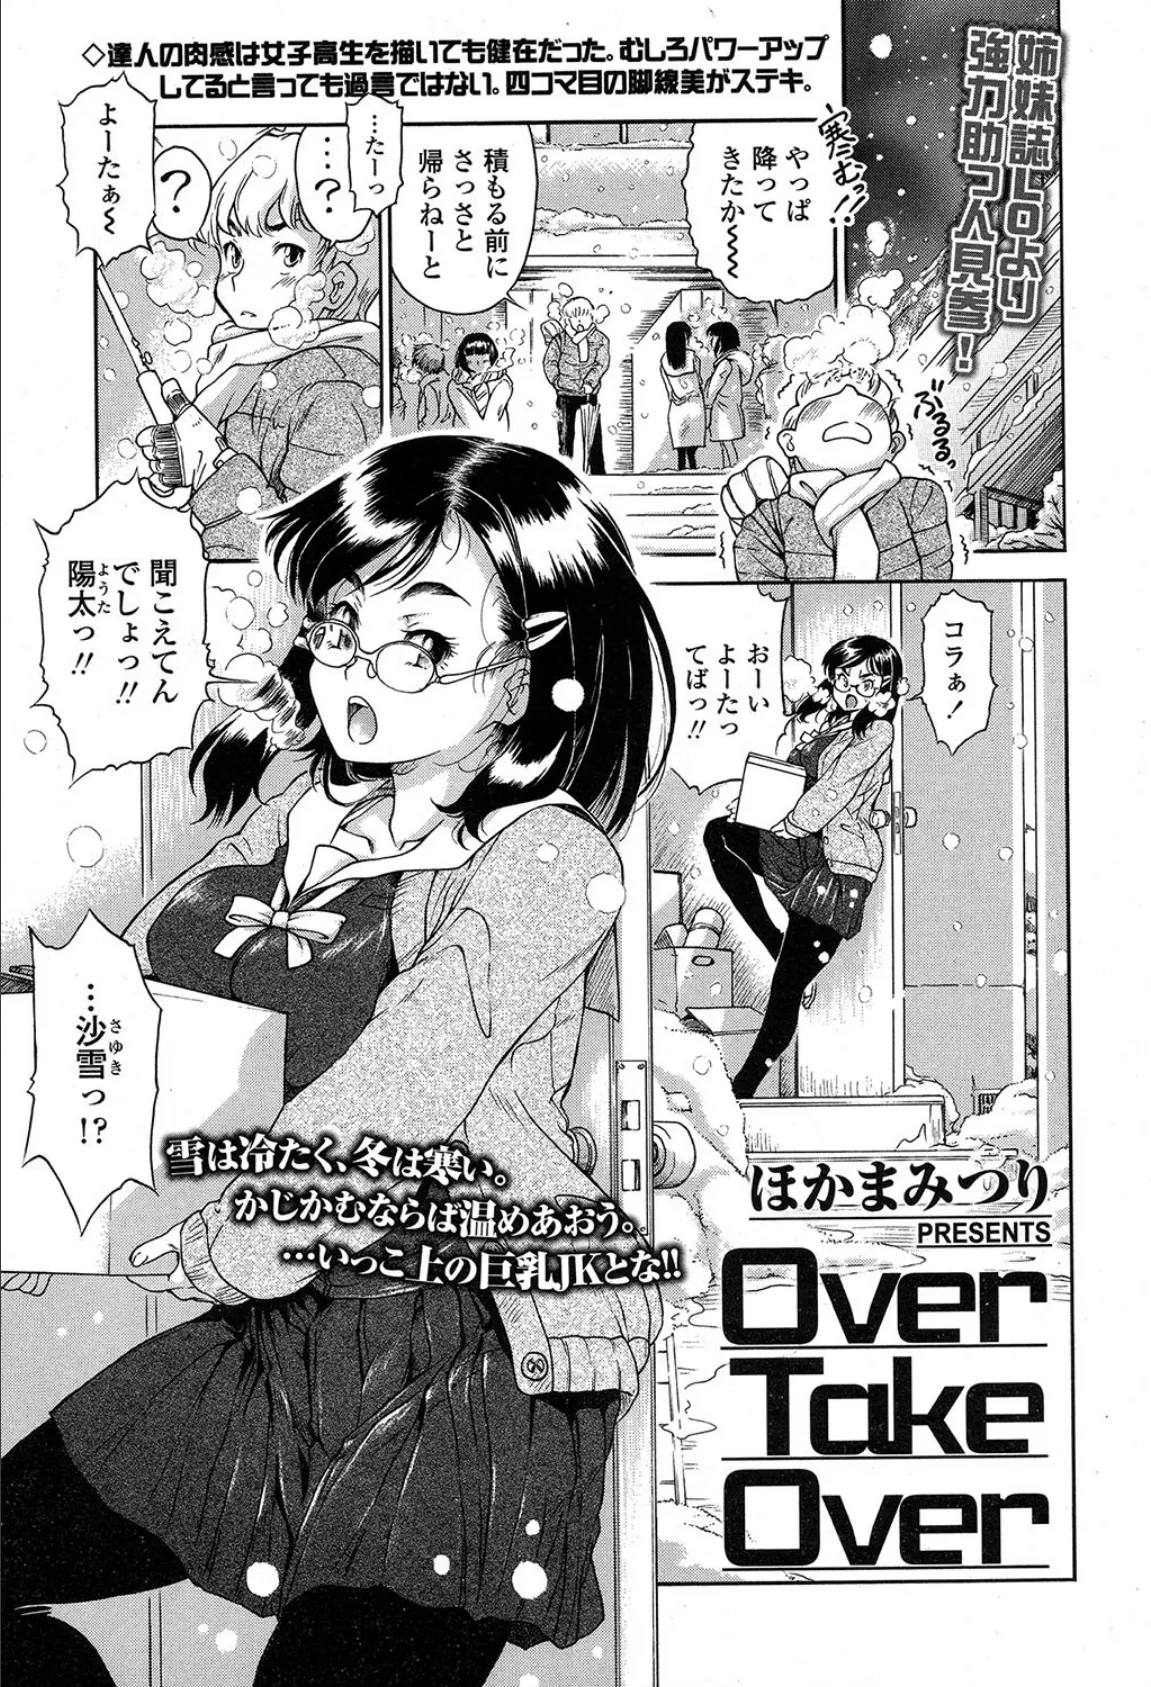 Over Take Over 1ページ